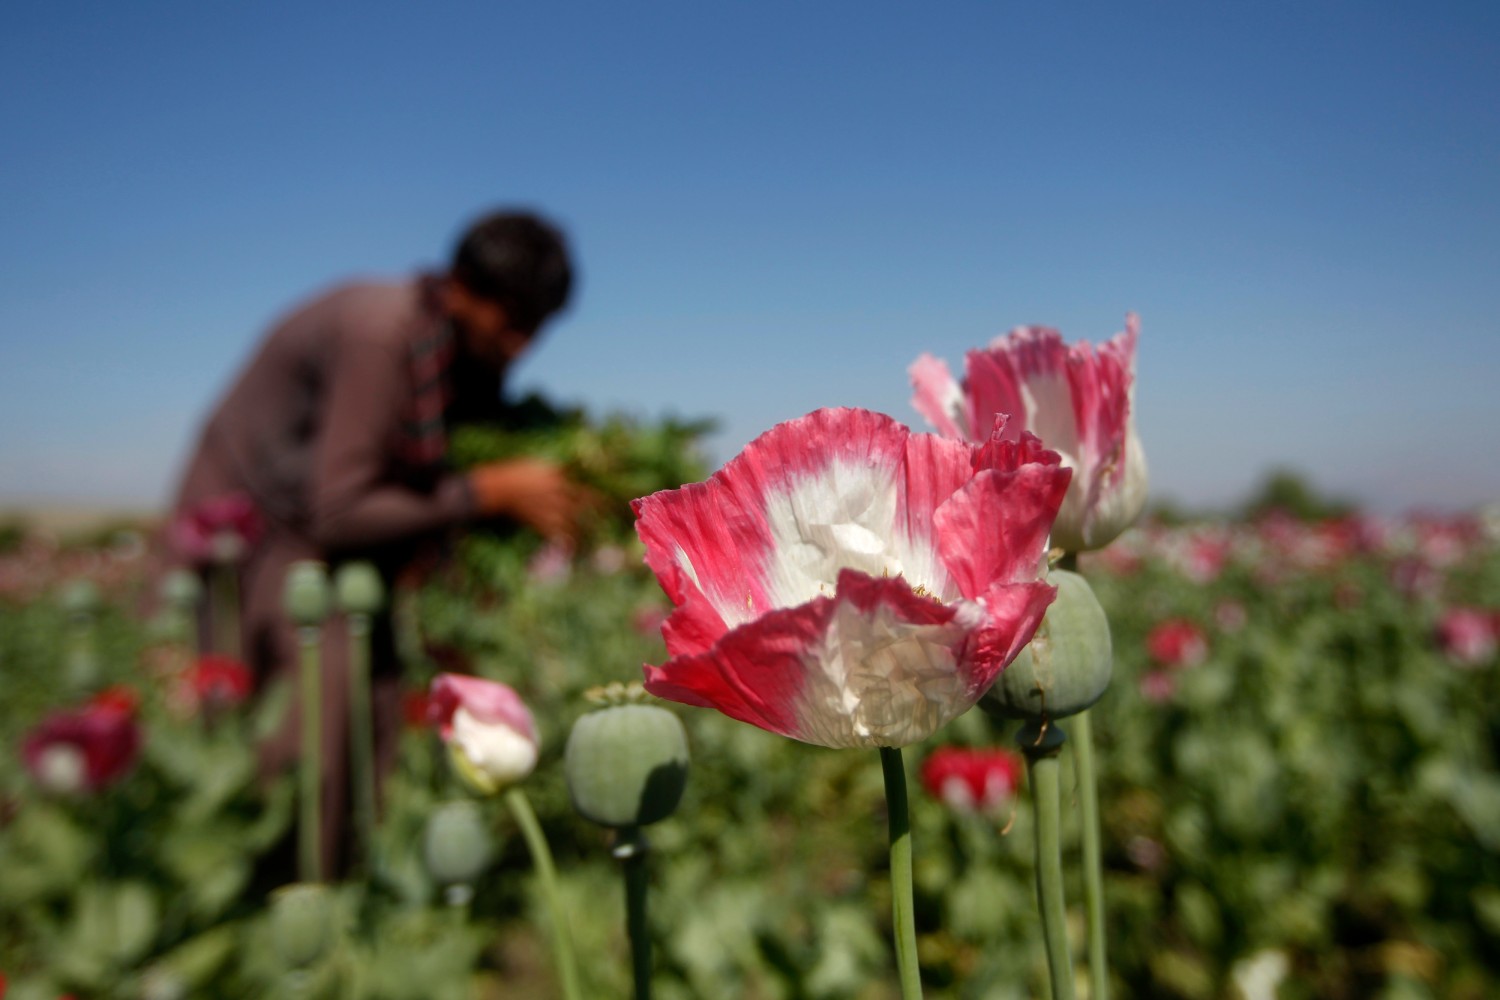 An Afghan man works on a poppy field in Jalalabad province April 17, 2014. Reuters/ Parwiz